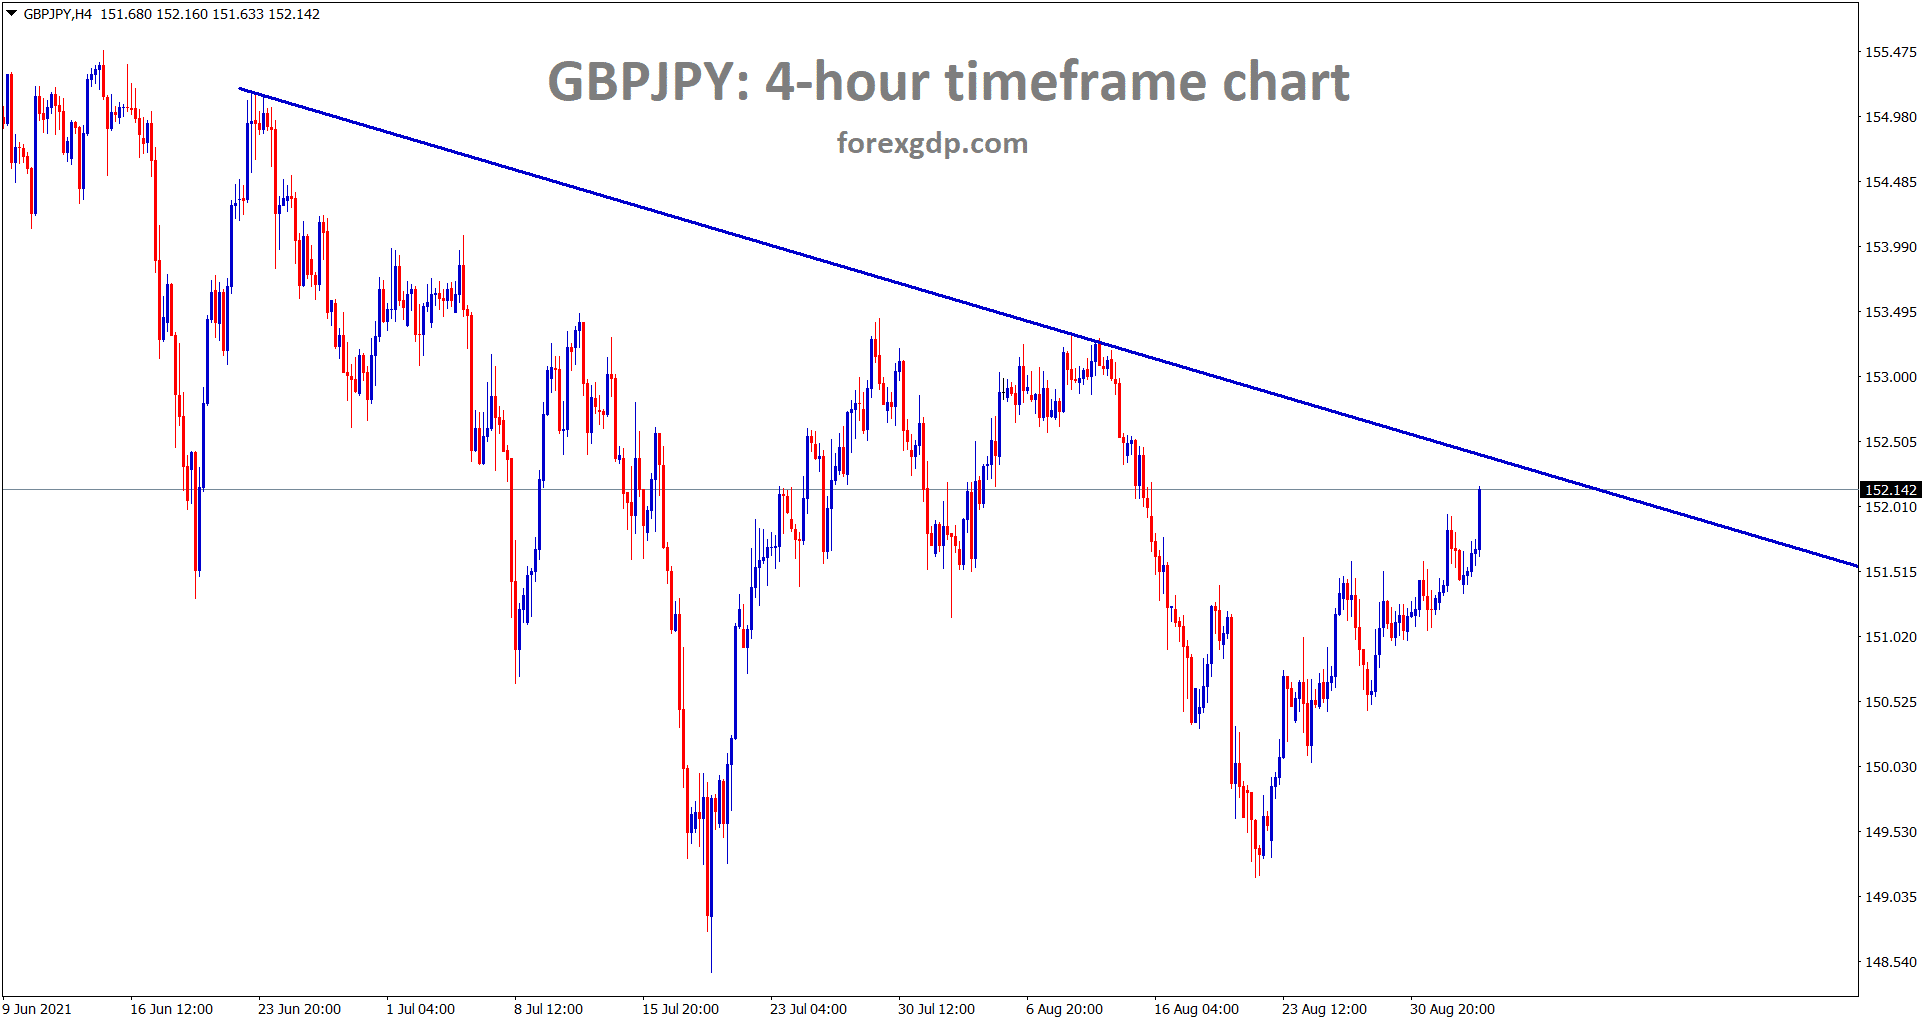 GBPJPY is going to reach the lower high area of the downtrend line